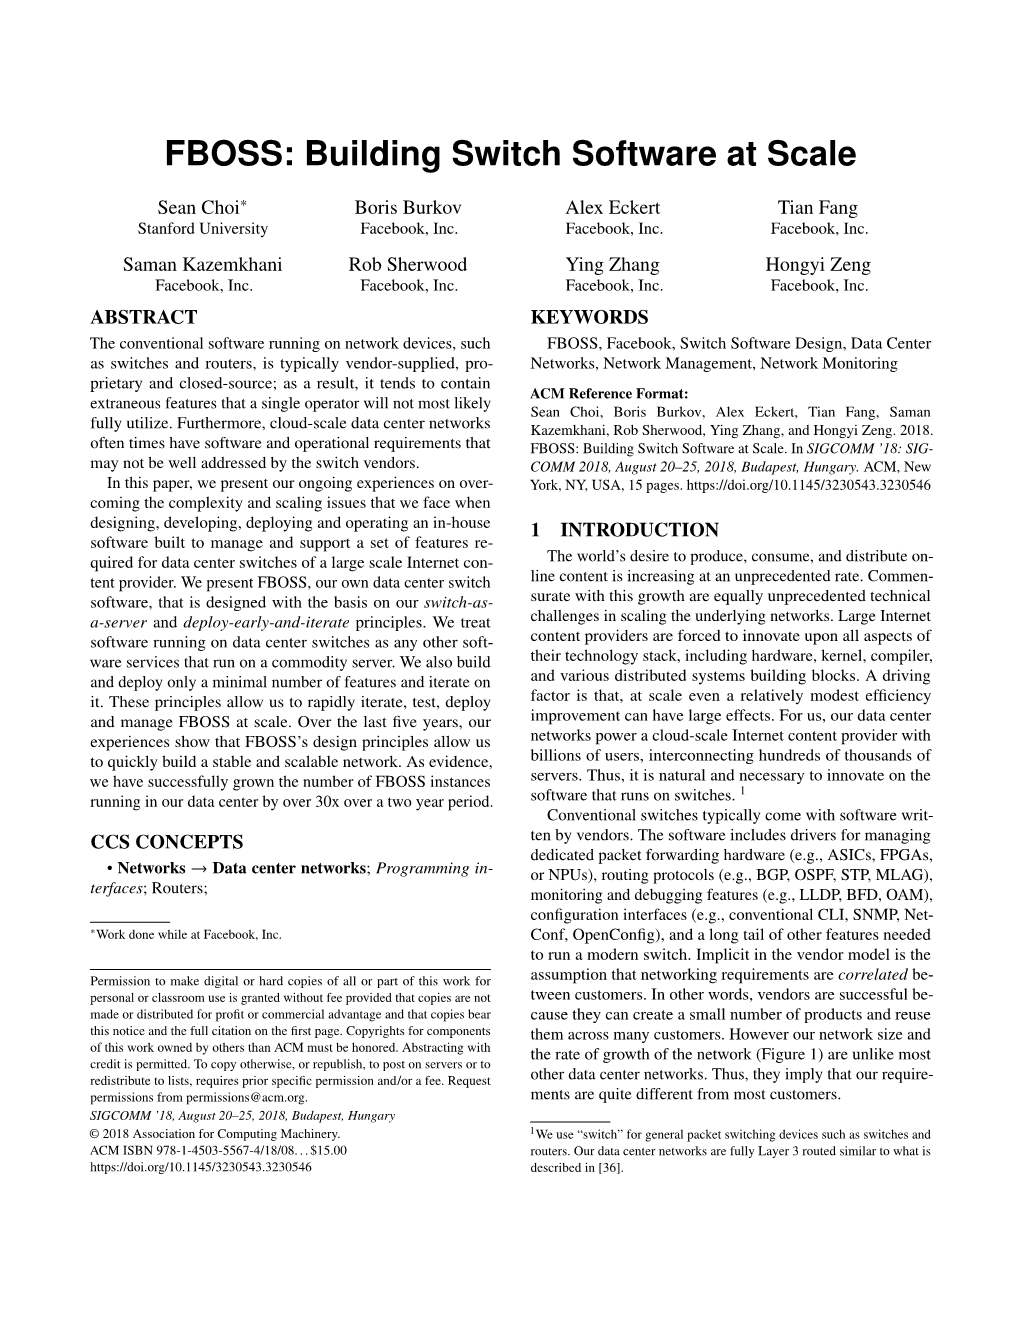 FBOSS: Building Switch Software at Scale